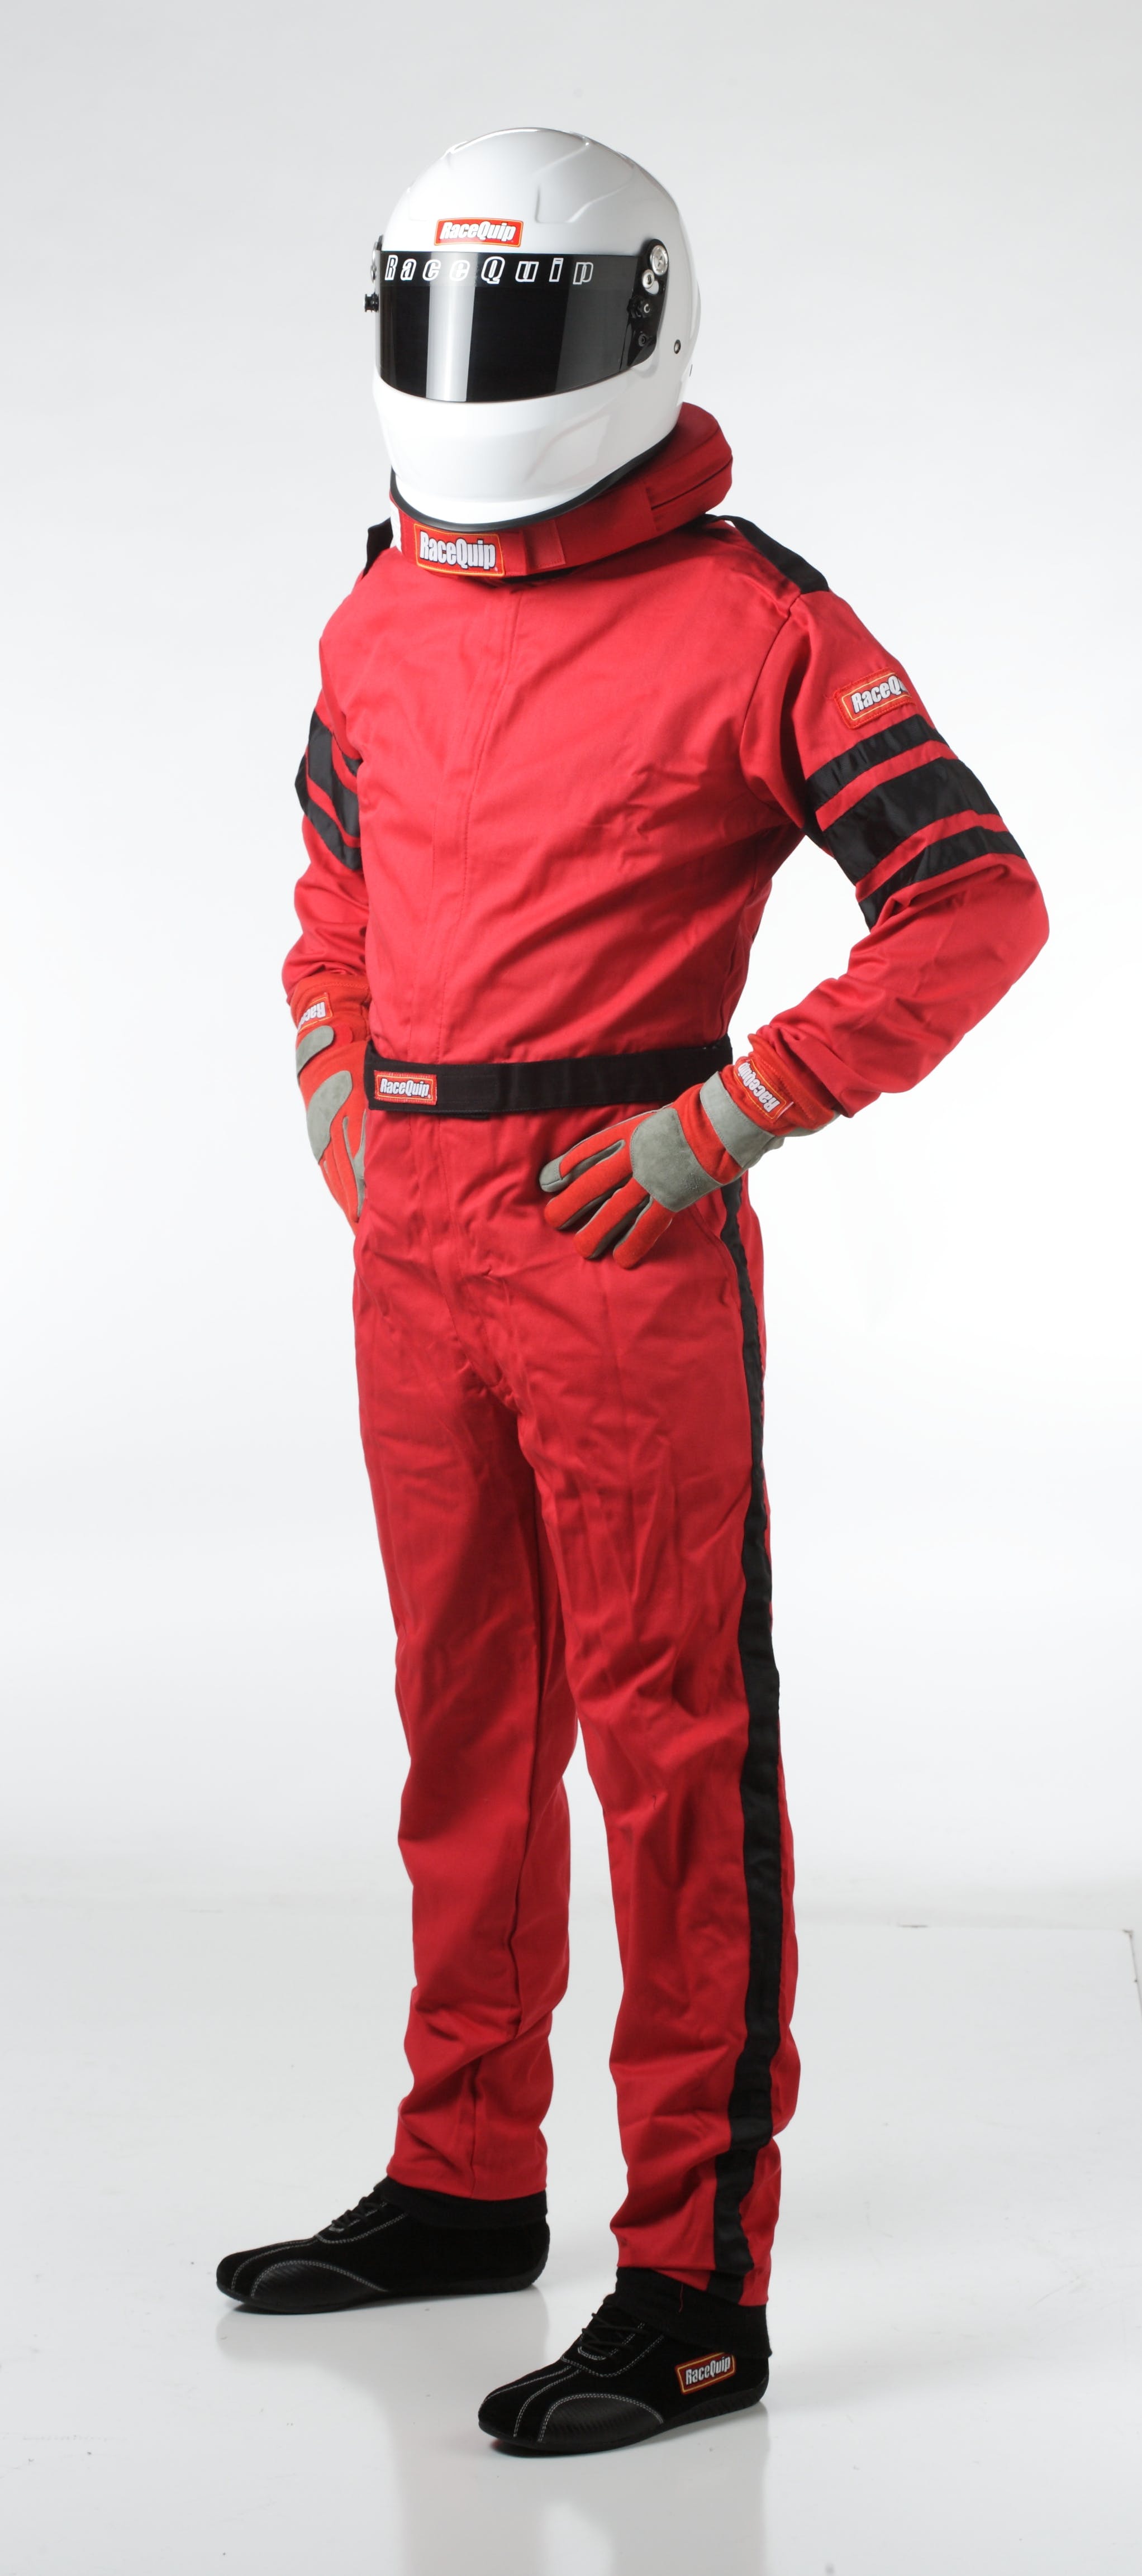 RaceQuip 110017 SFI-1 Pyrovatex One-Piece Single-Layer Racing Fire Suit (Red, XX-Large)